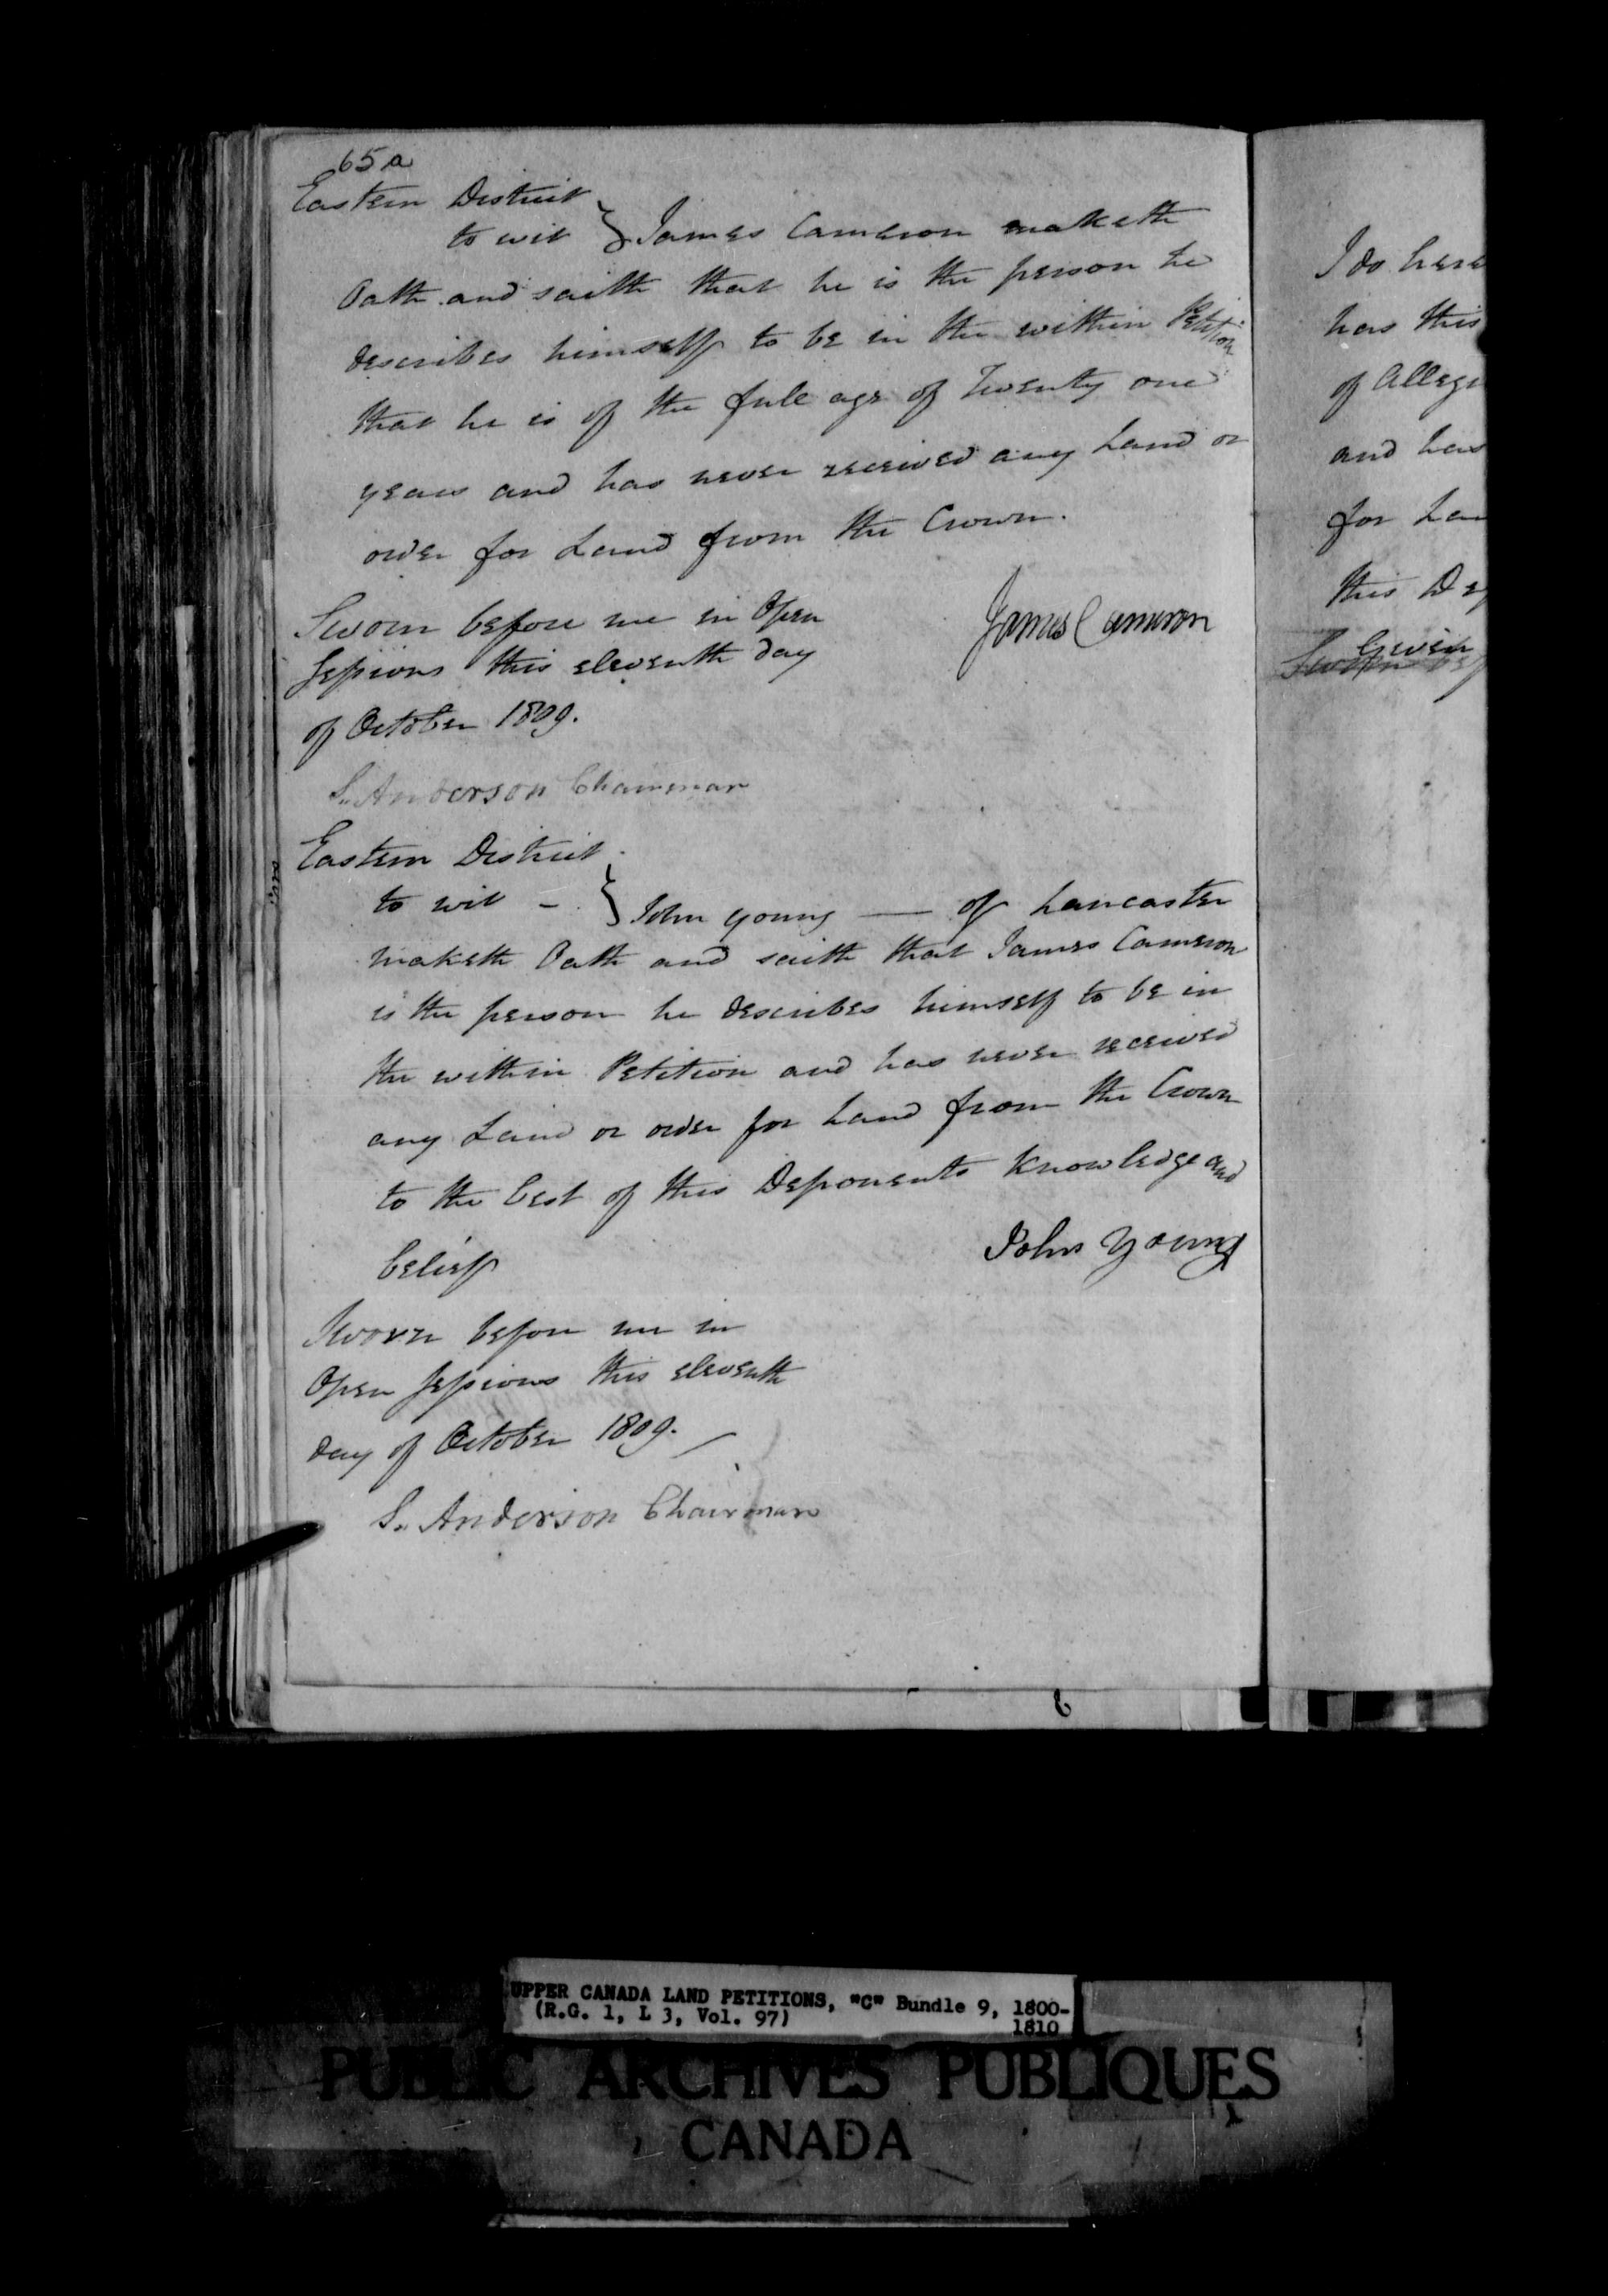 Title: Upper Canada Land Petitions (1763-1865) - Mikan Number: 205131 - Microform: c-1651